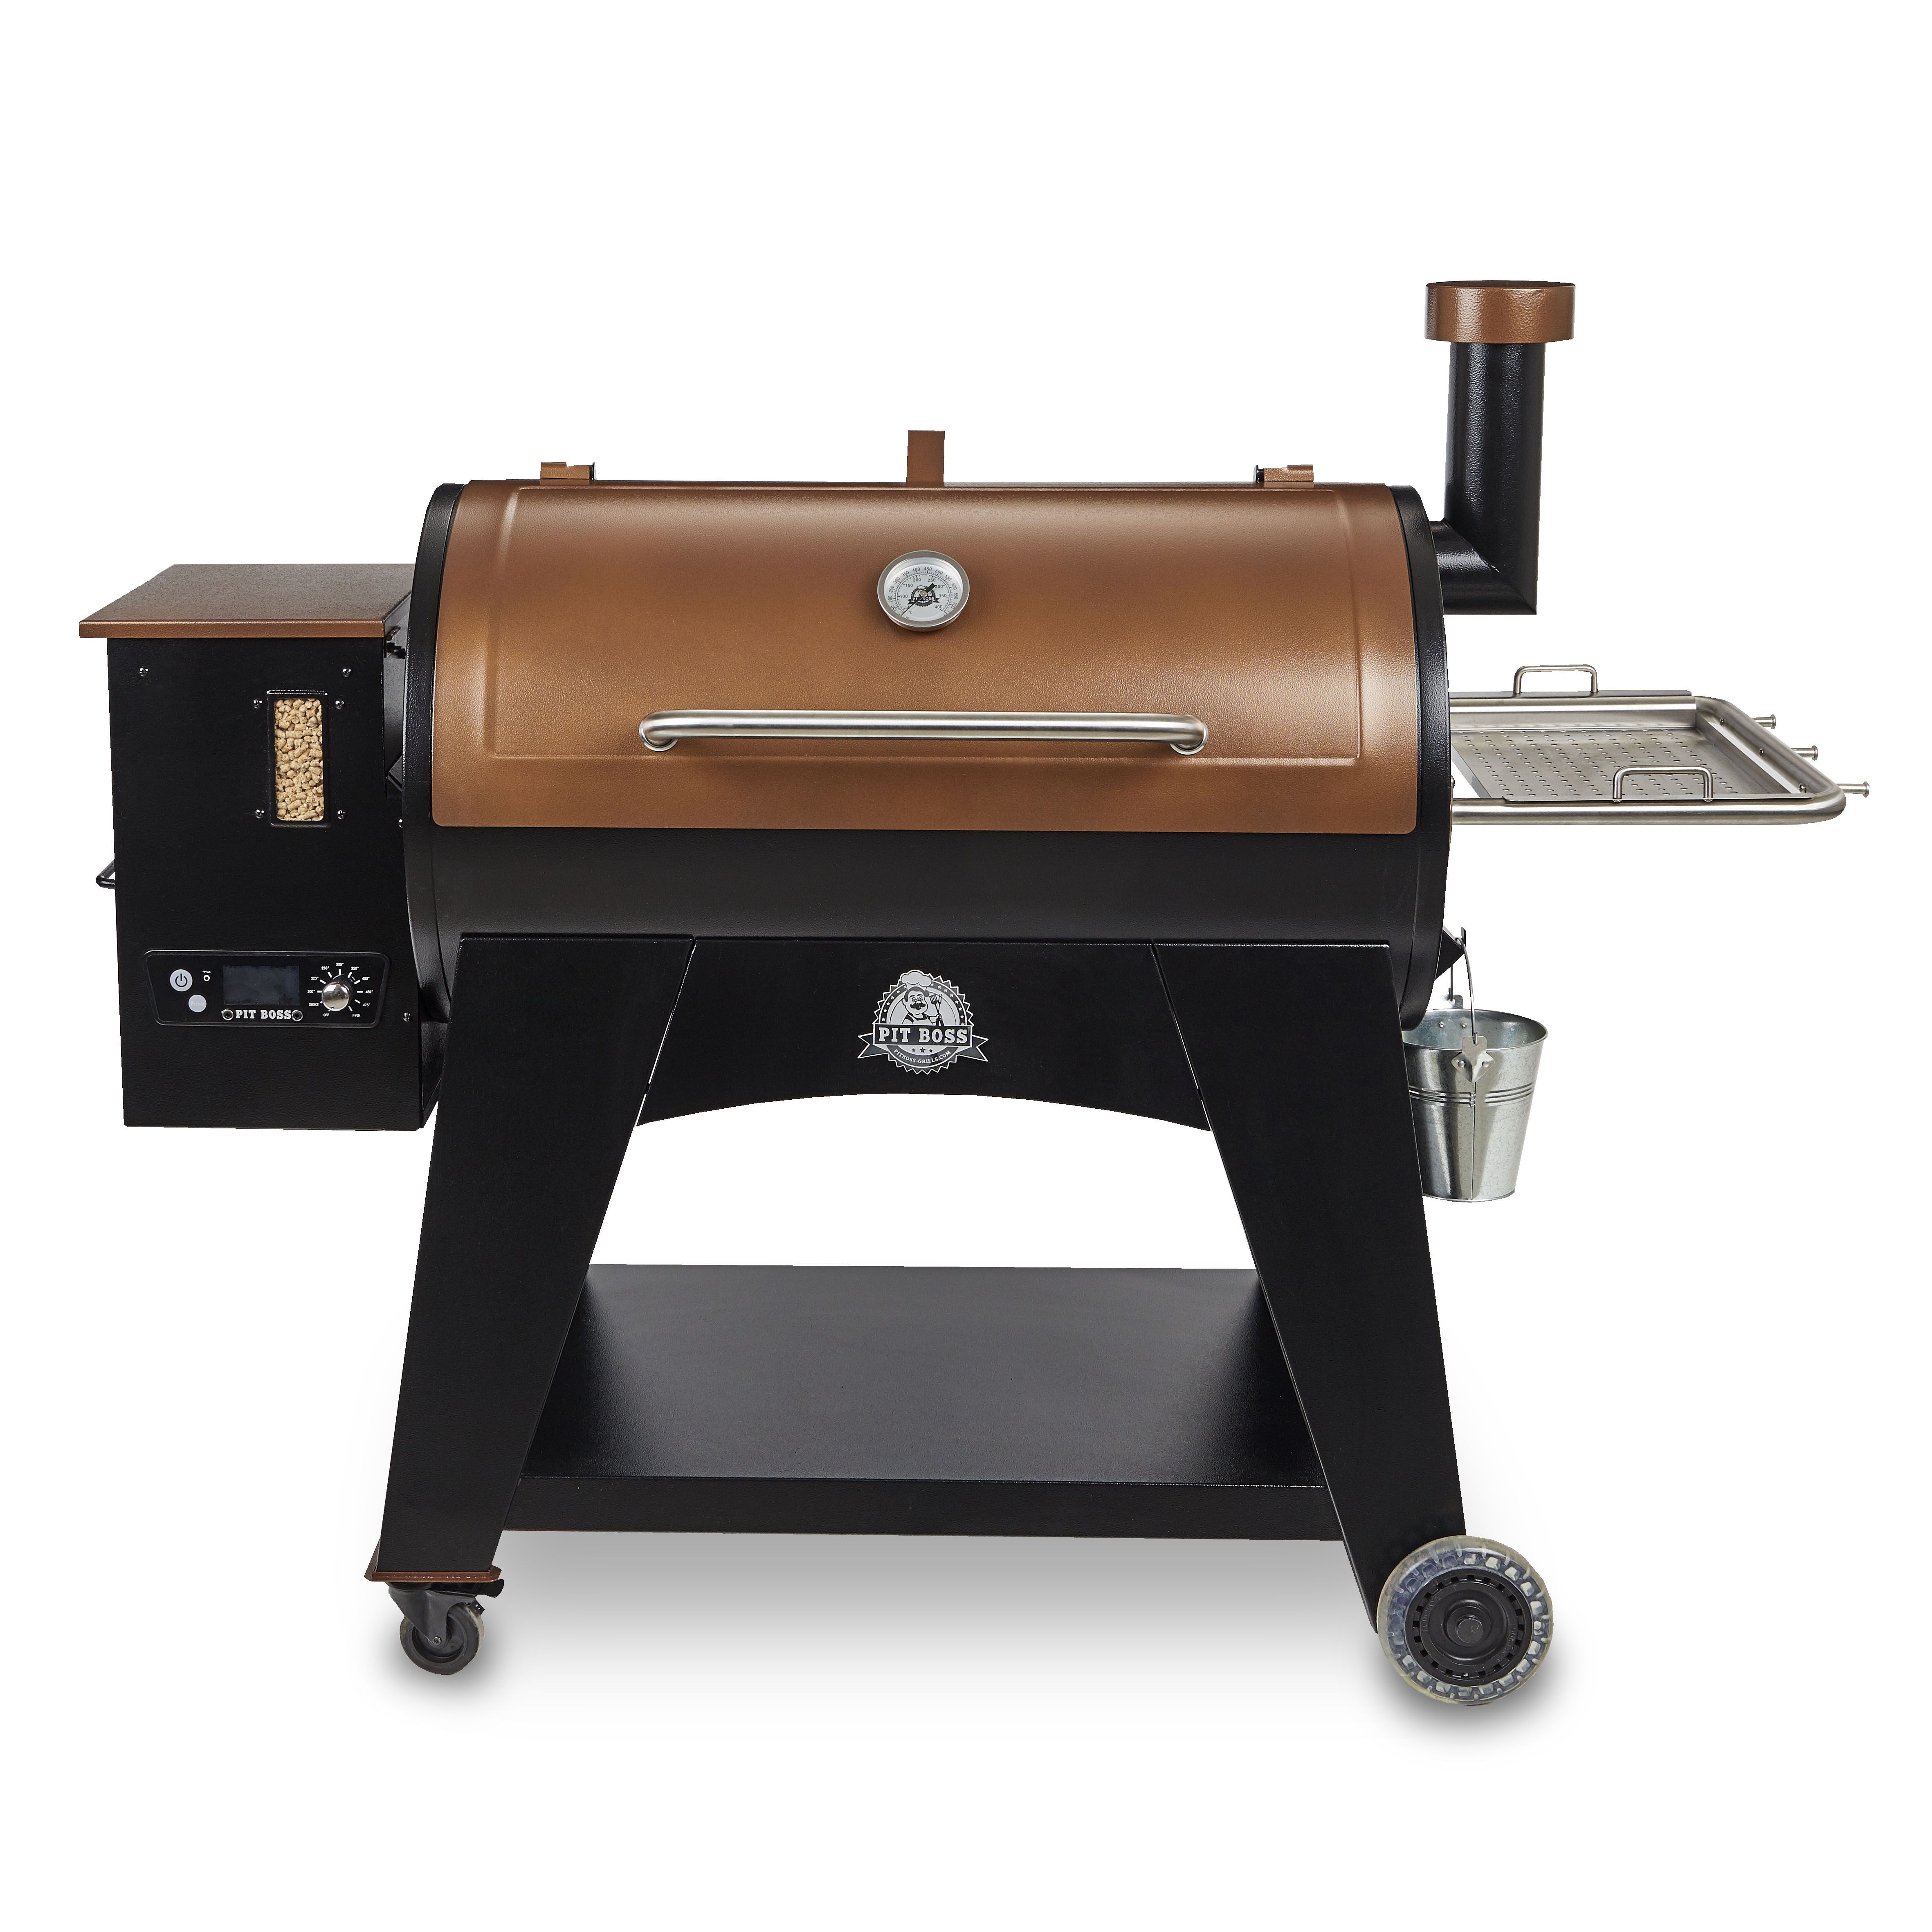 Austin XL 1000 Sq. In. Pellet Grill with Flame Broiler and Cooking Probe